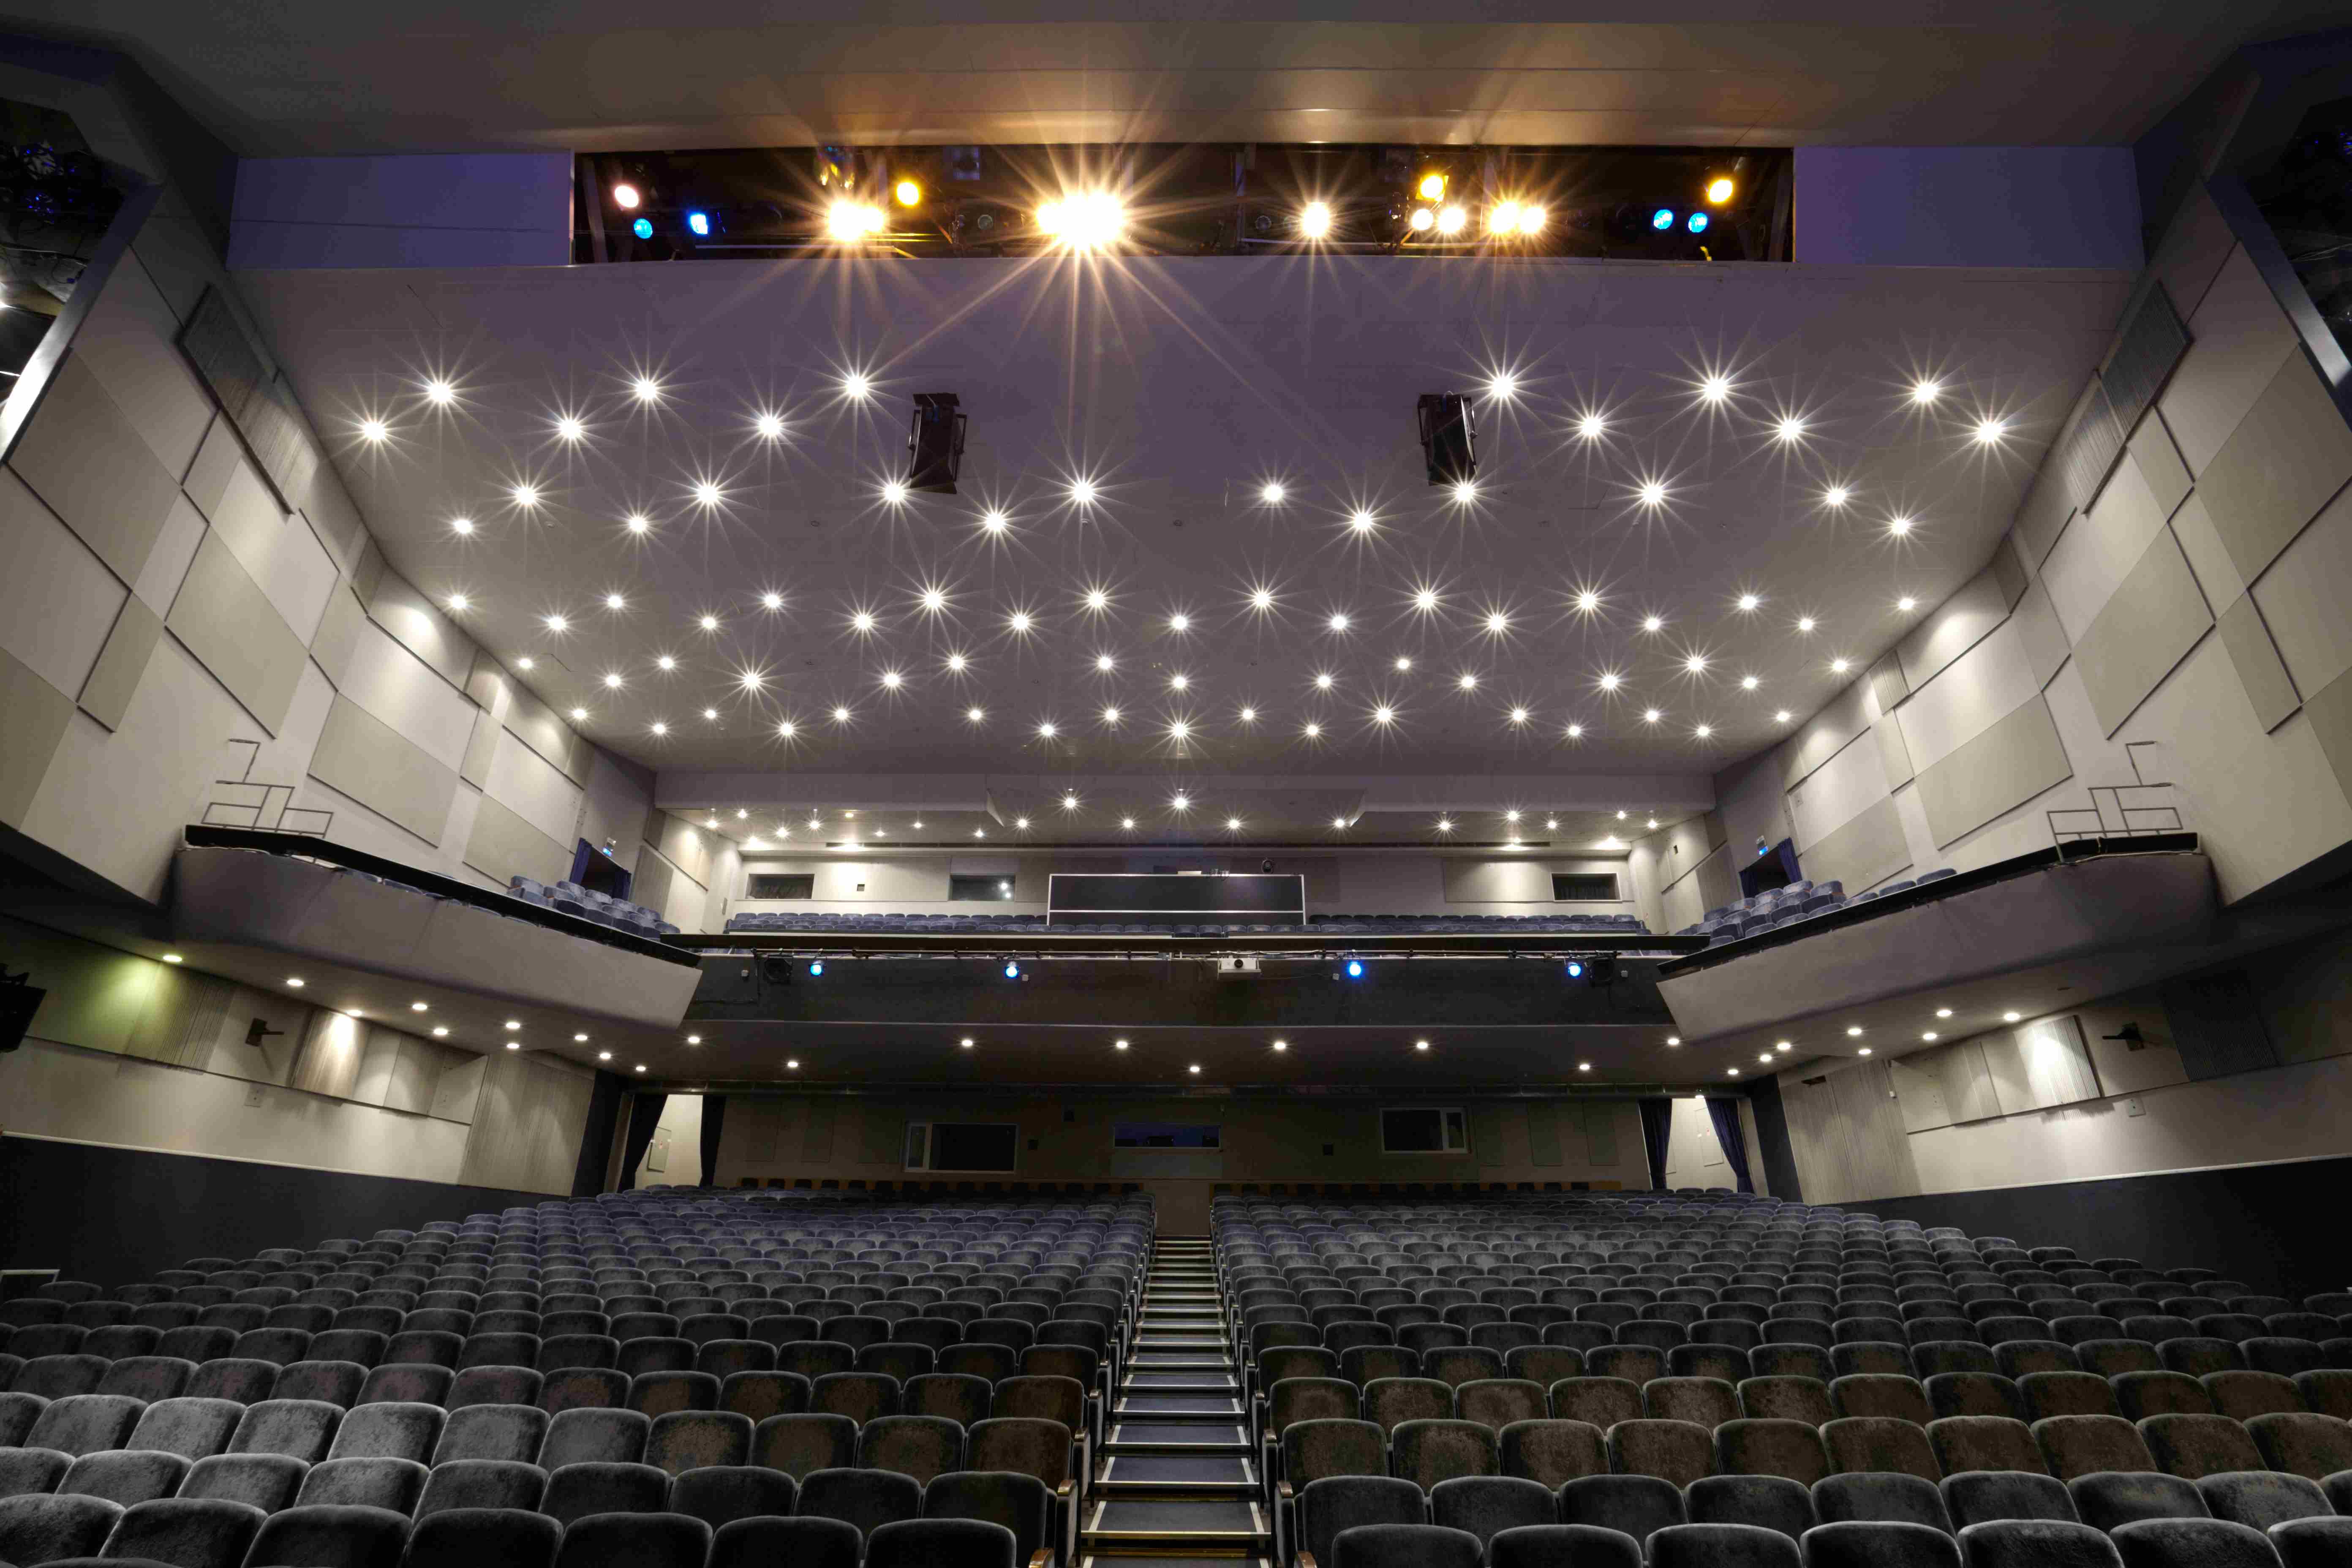 Interior of empty cinema auditorium with lines of chairs.